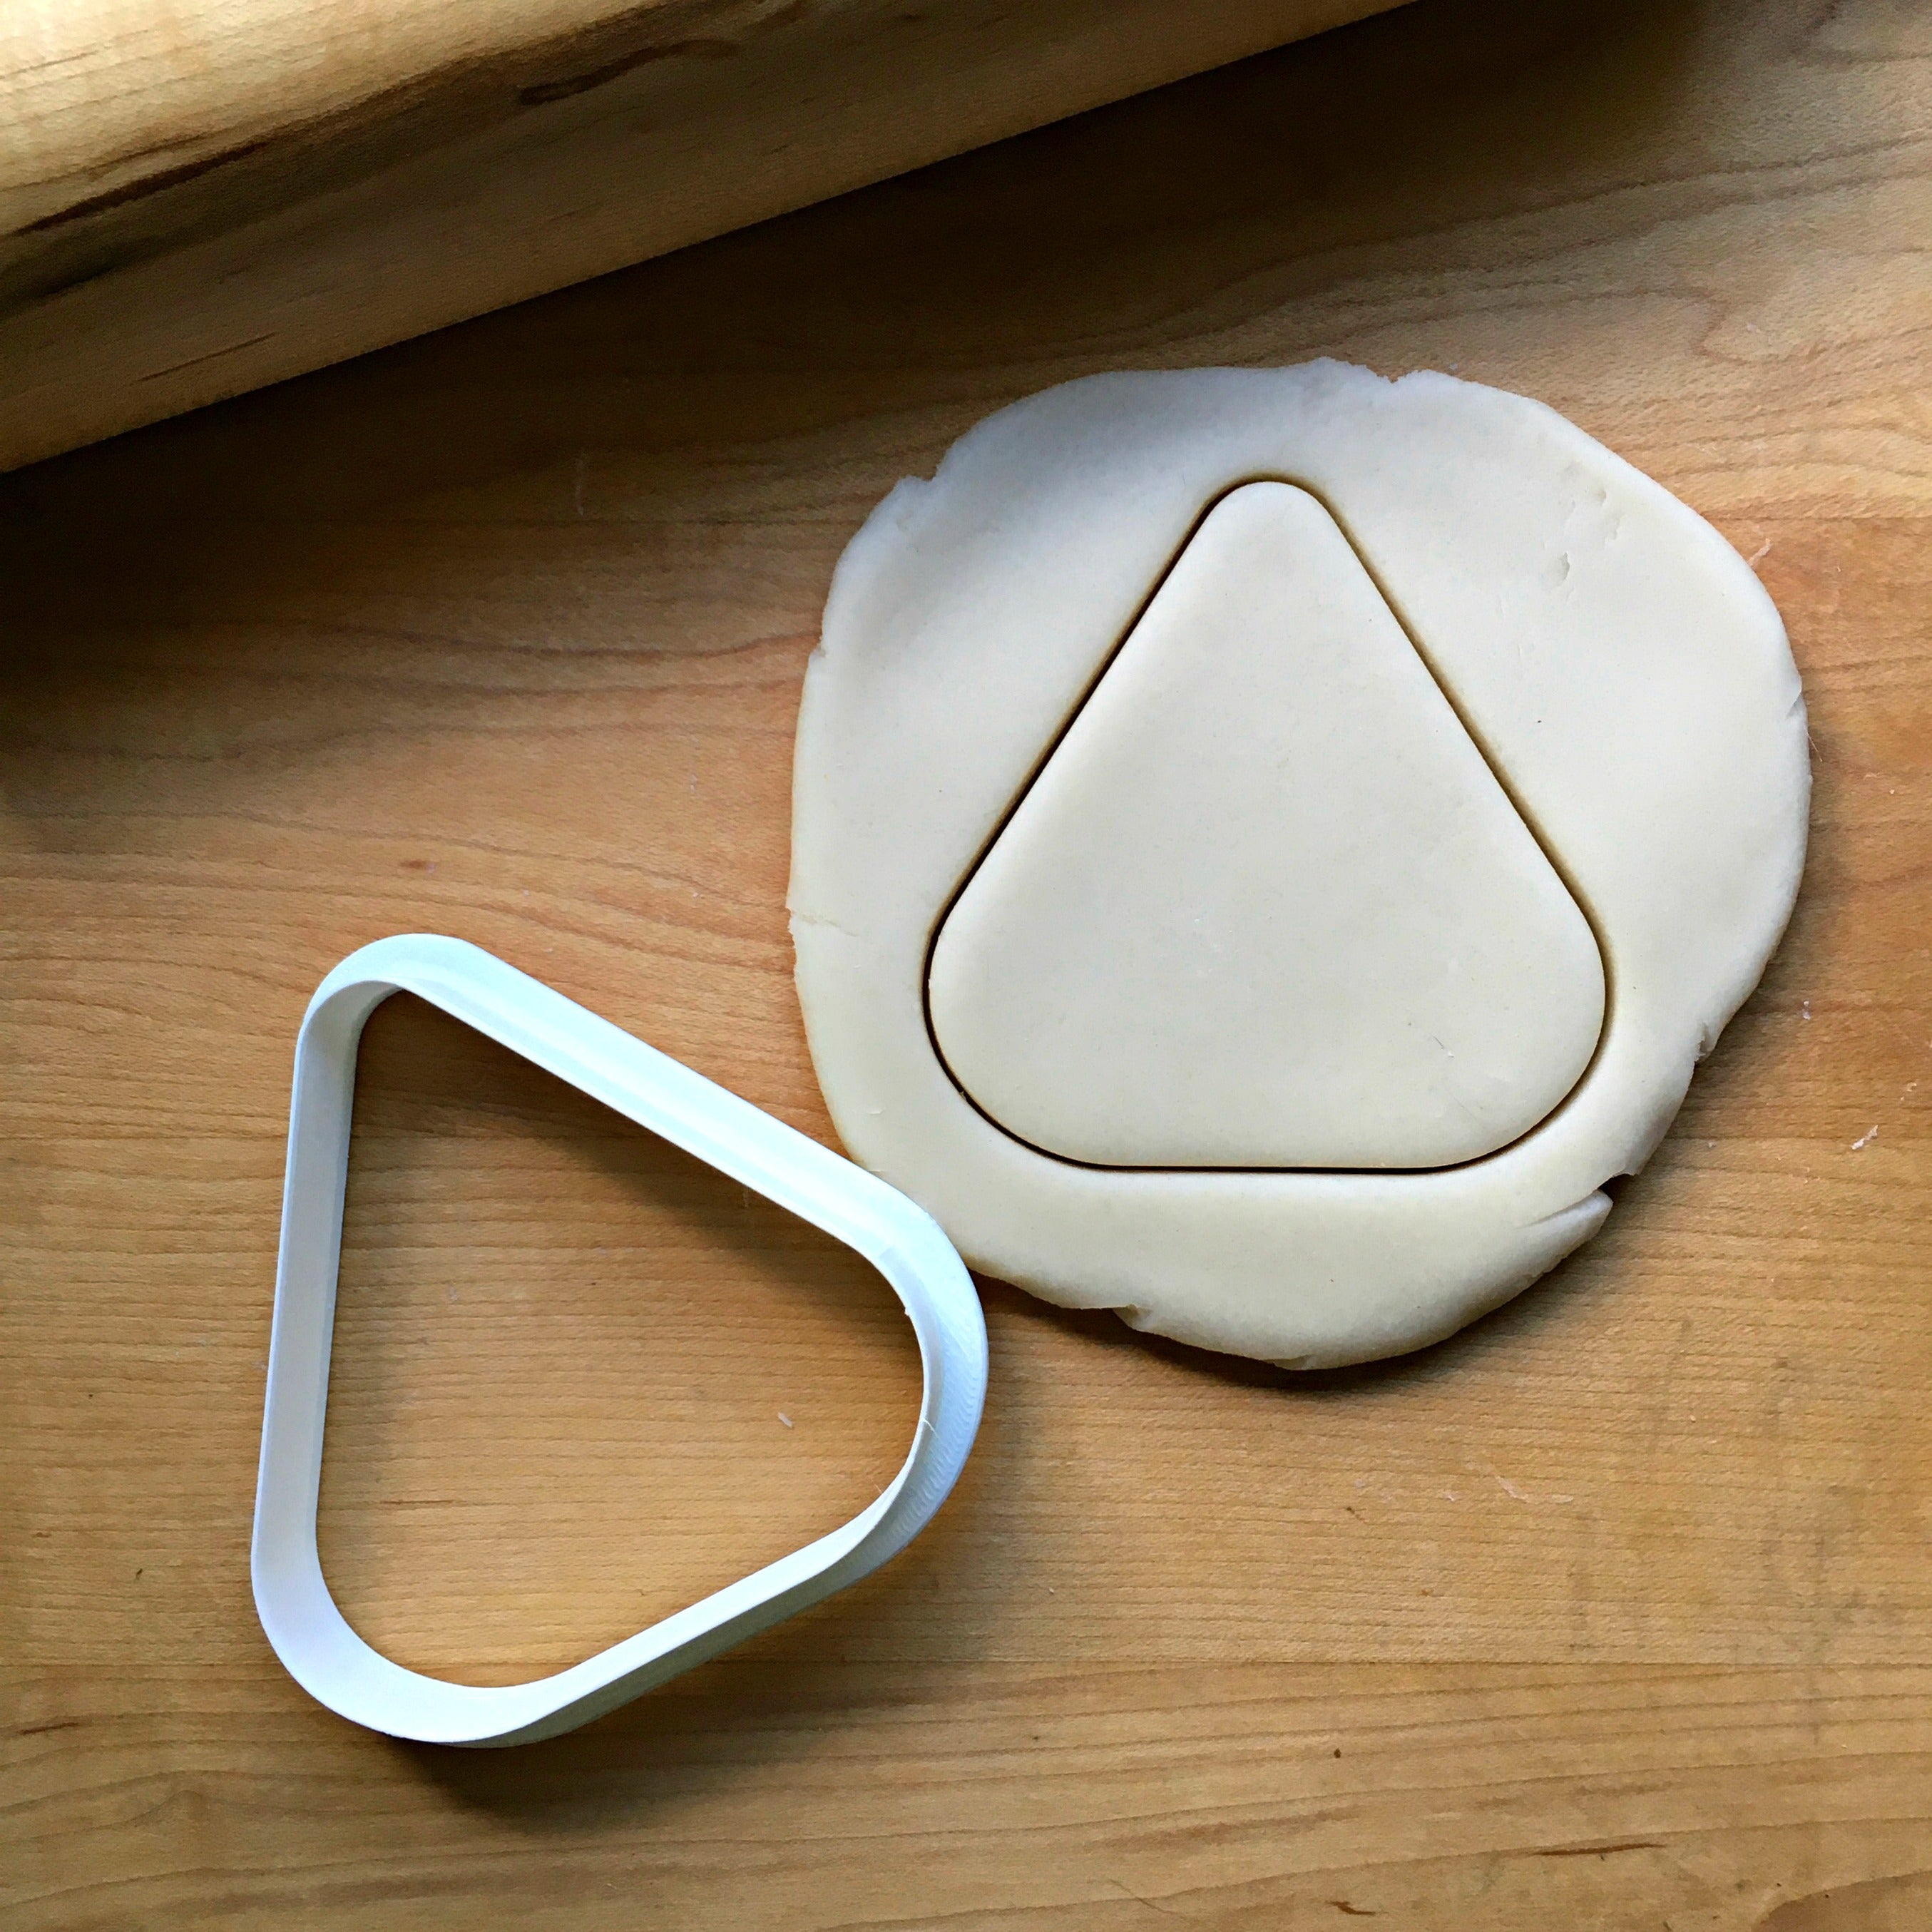 Rounded Triangle Cookie Cutter/Dishwasher Safe